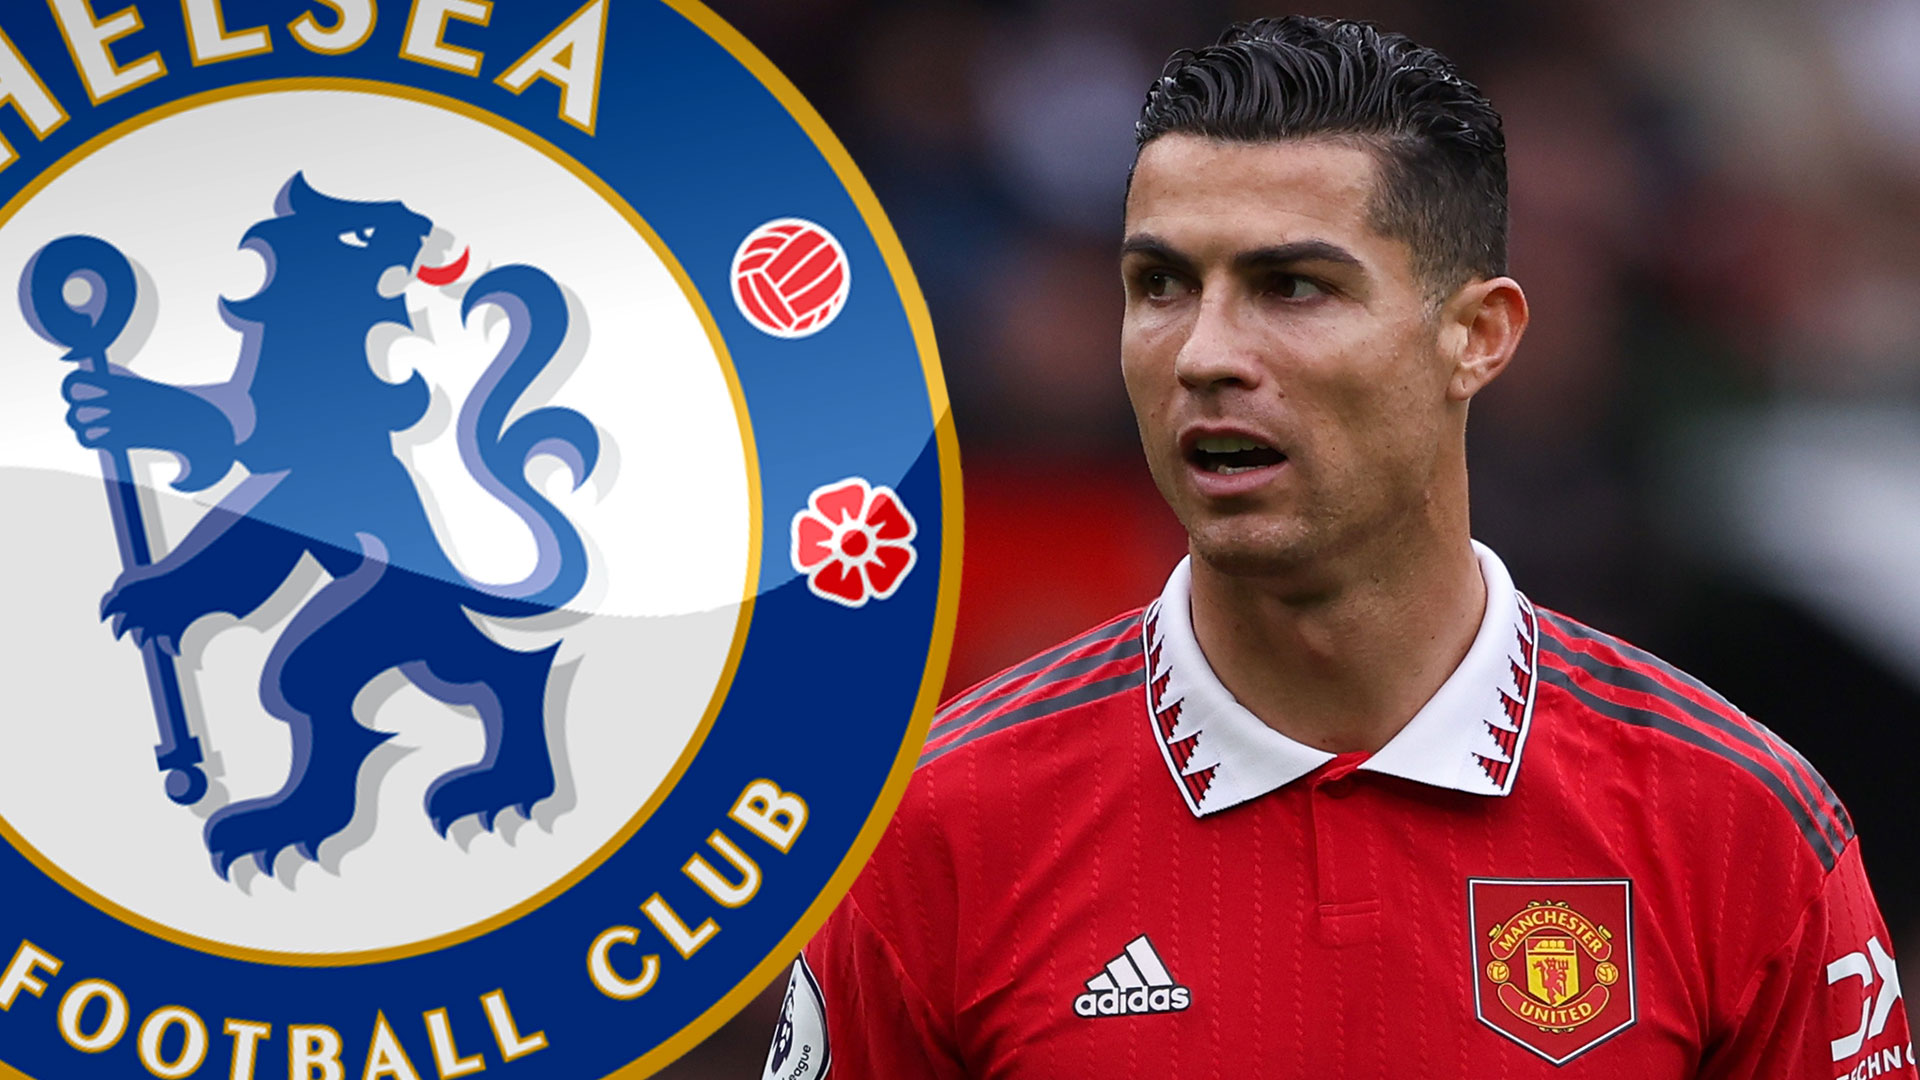 Jorge Mendes is the agent for Cristiano Ronaldo and will’reopen Chelsea Transfer Talks’ in response to Man Utd’s departure with Todd Boehly.